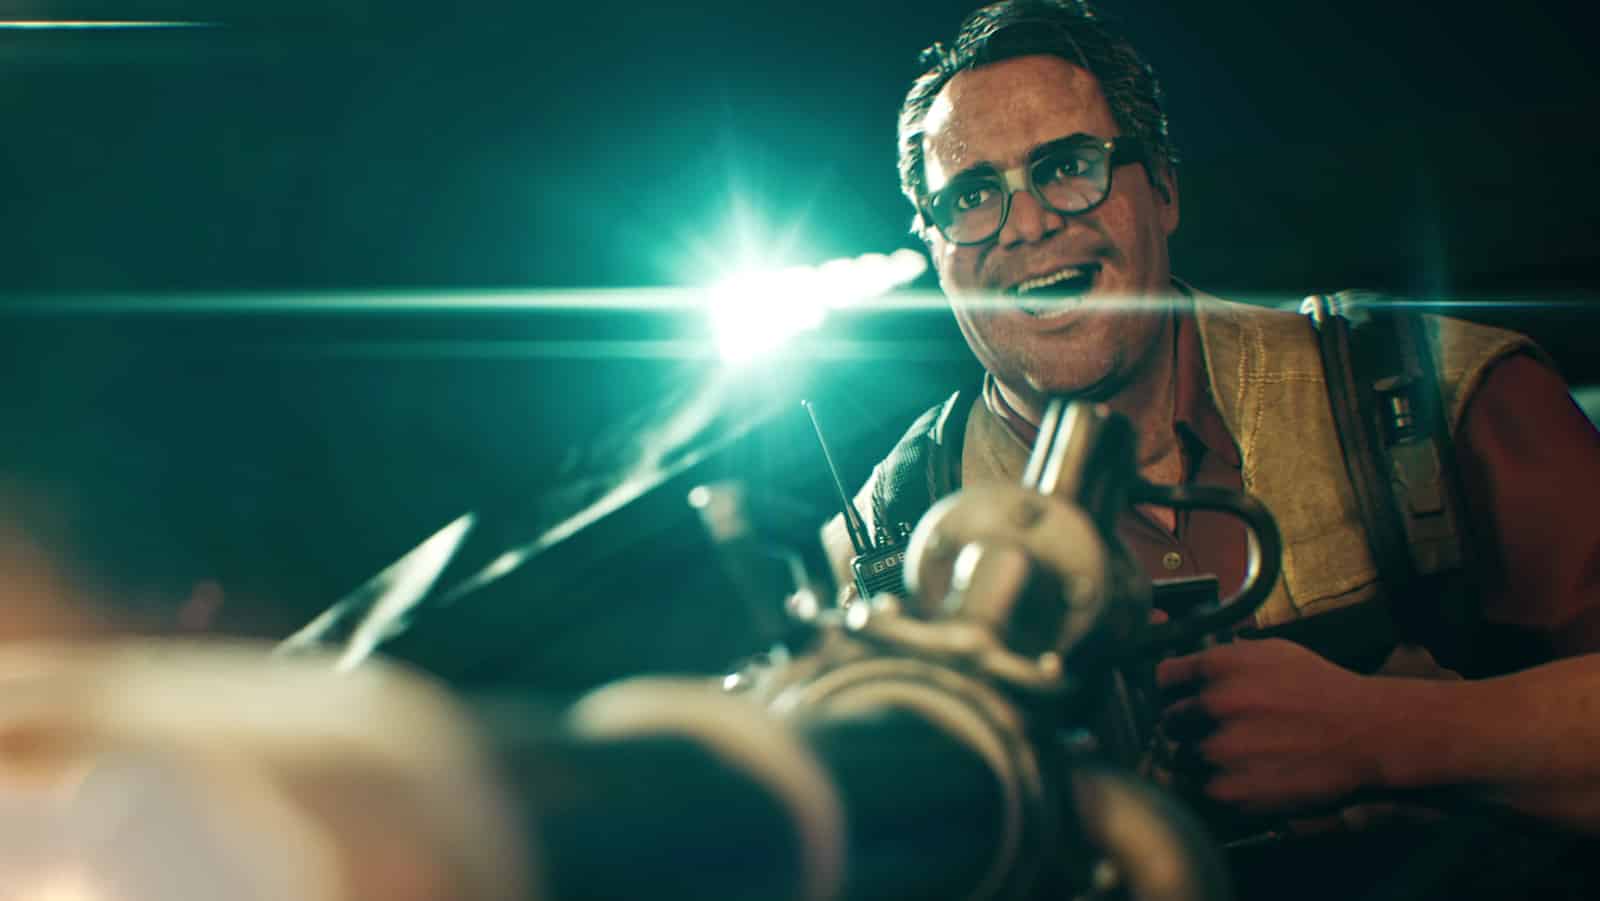 Back 4 Blood hoffman uses a huge gun to mow down zombies